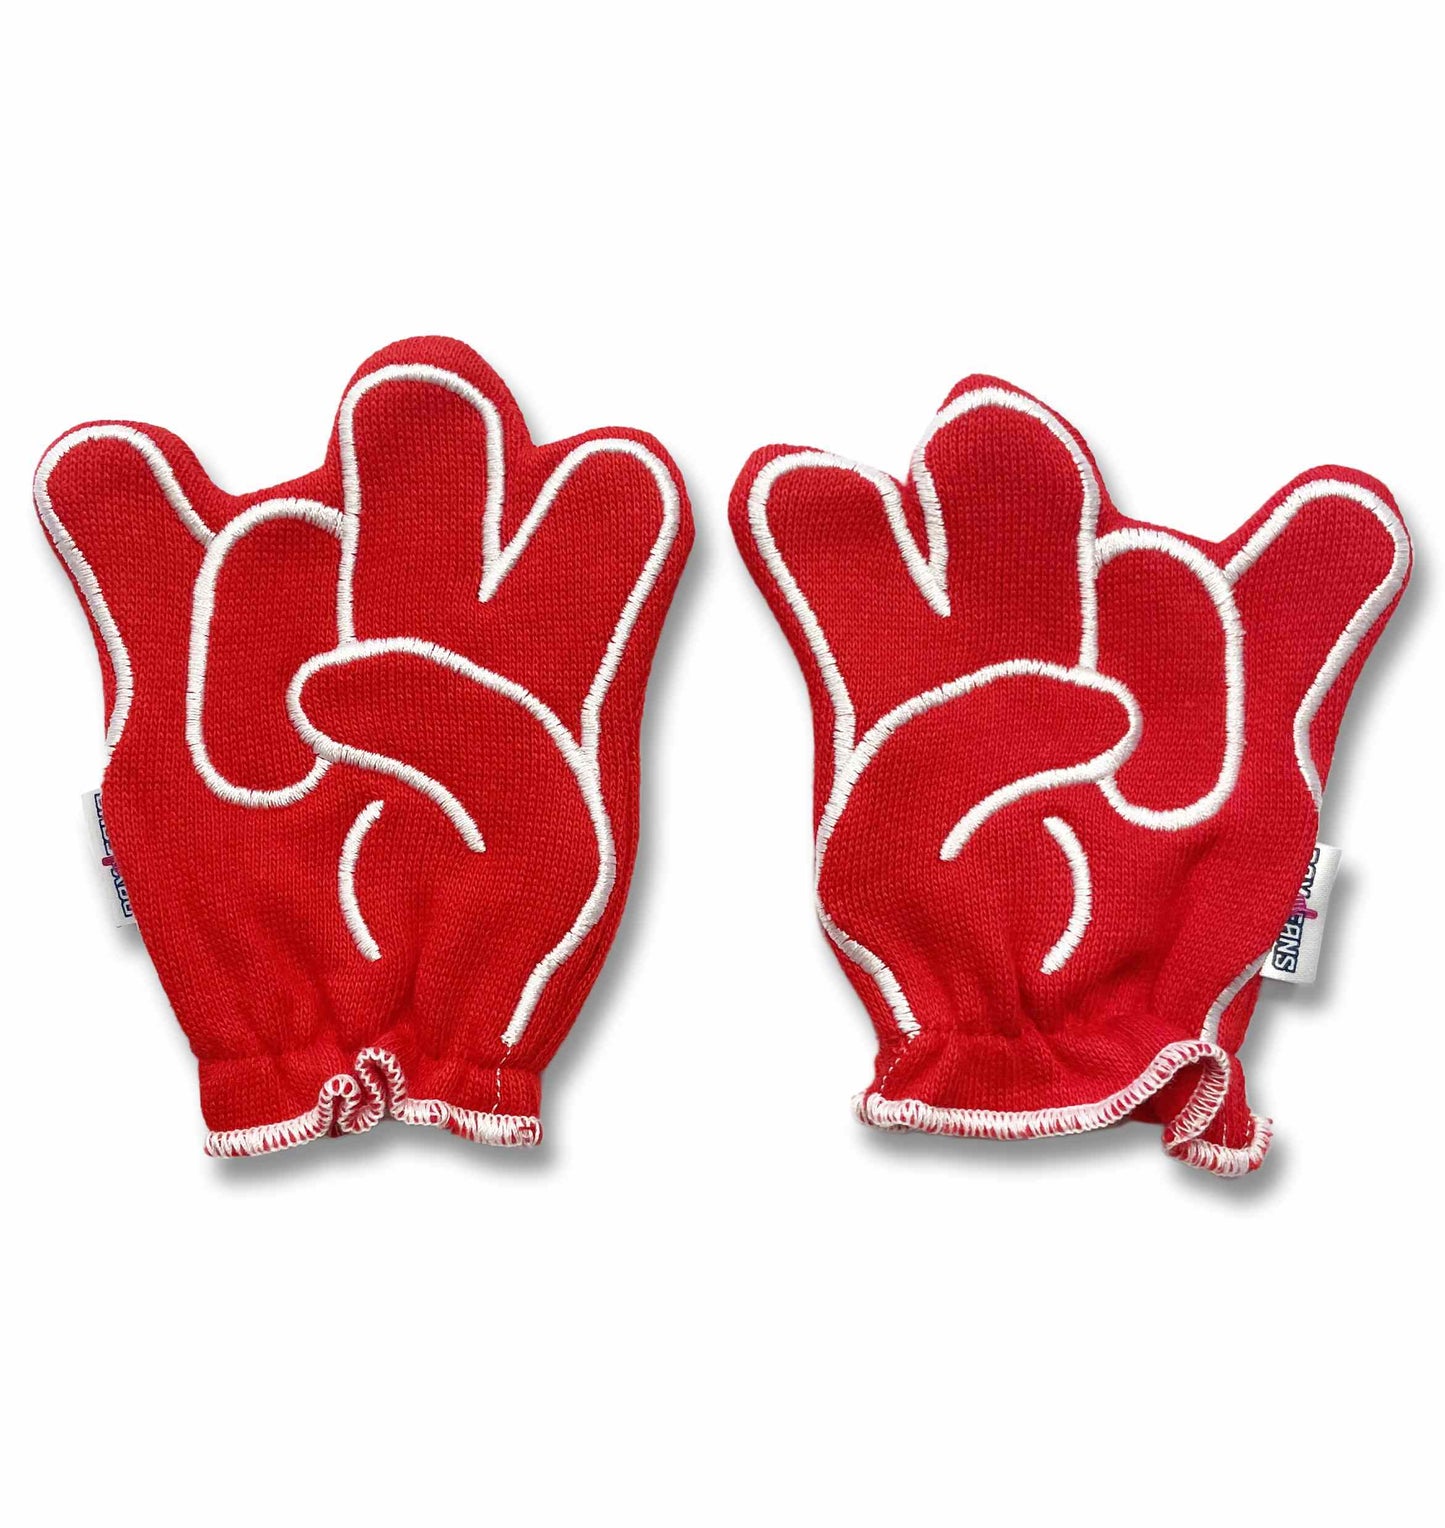 University of Houston Go Coogs! FanMitts™